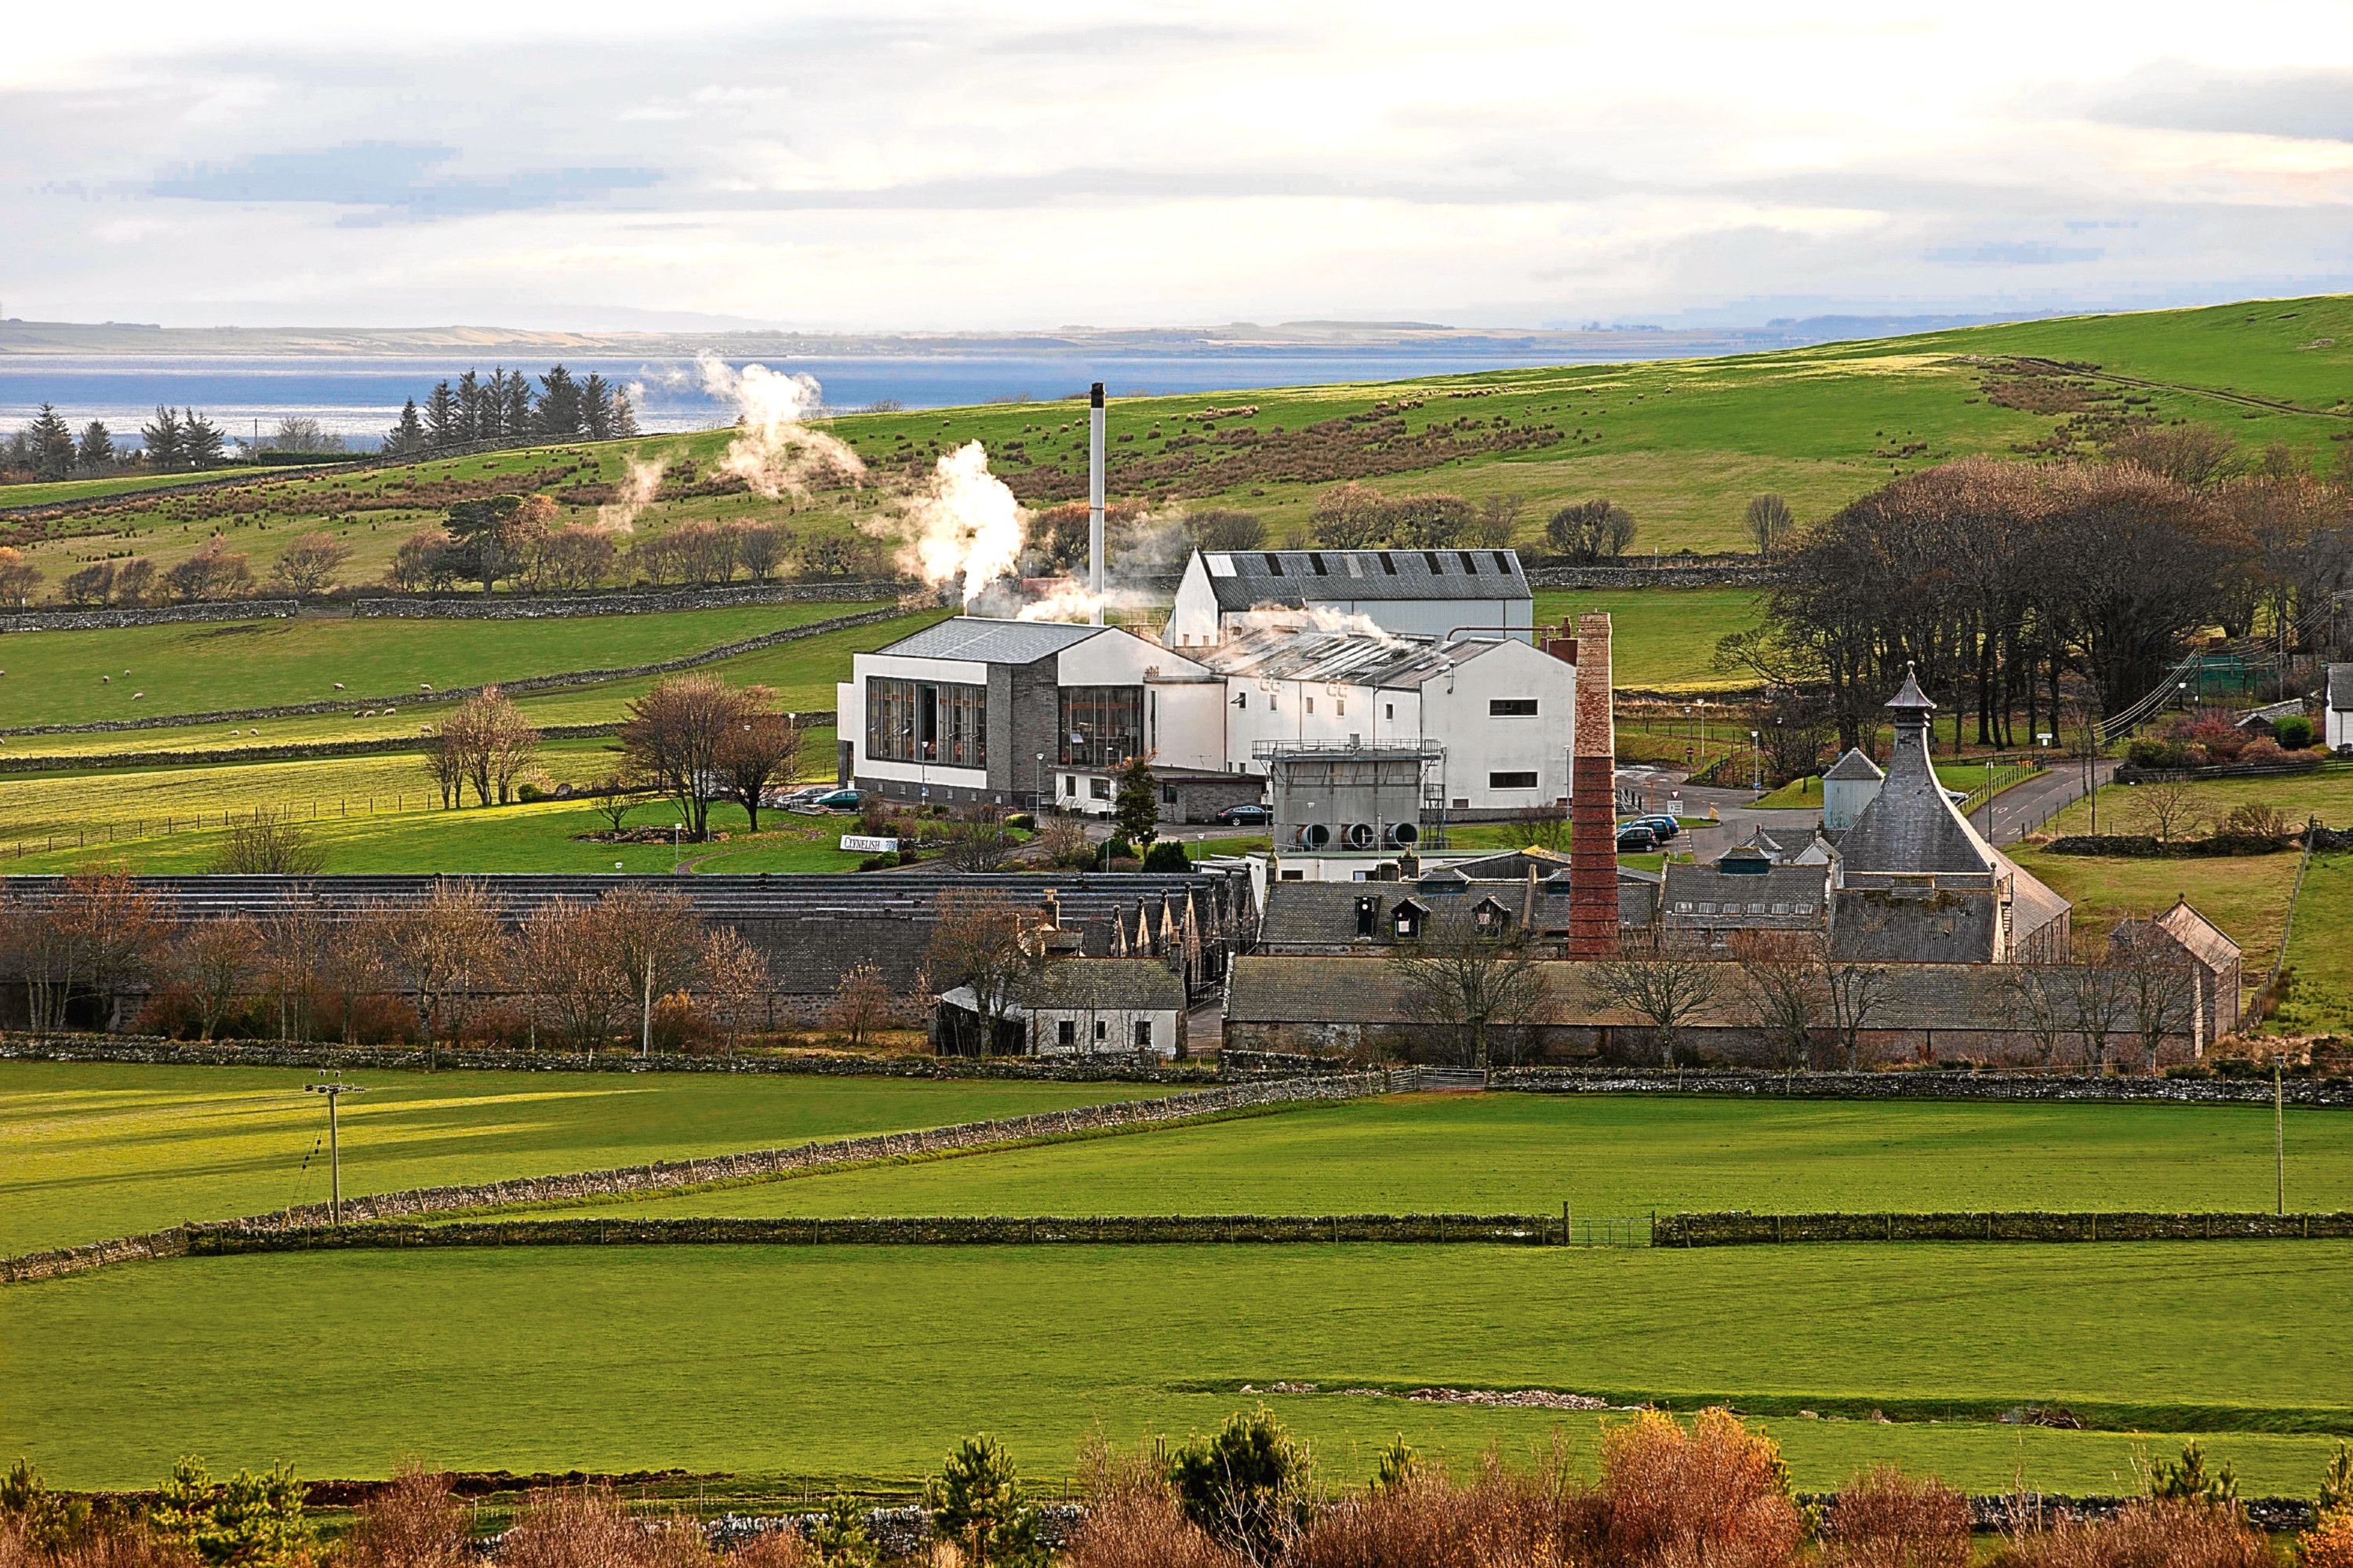 The Clynelish Distillery in Sutherland.